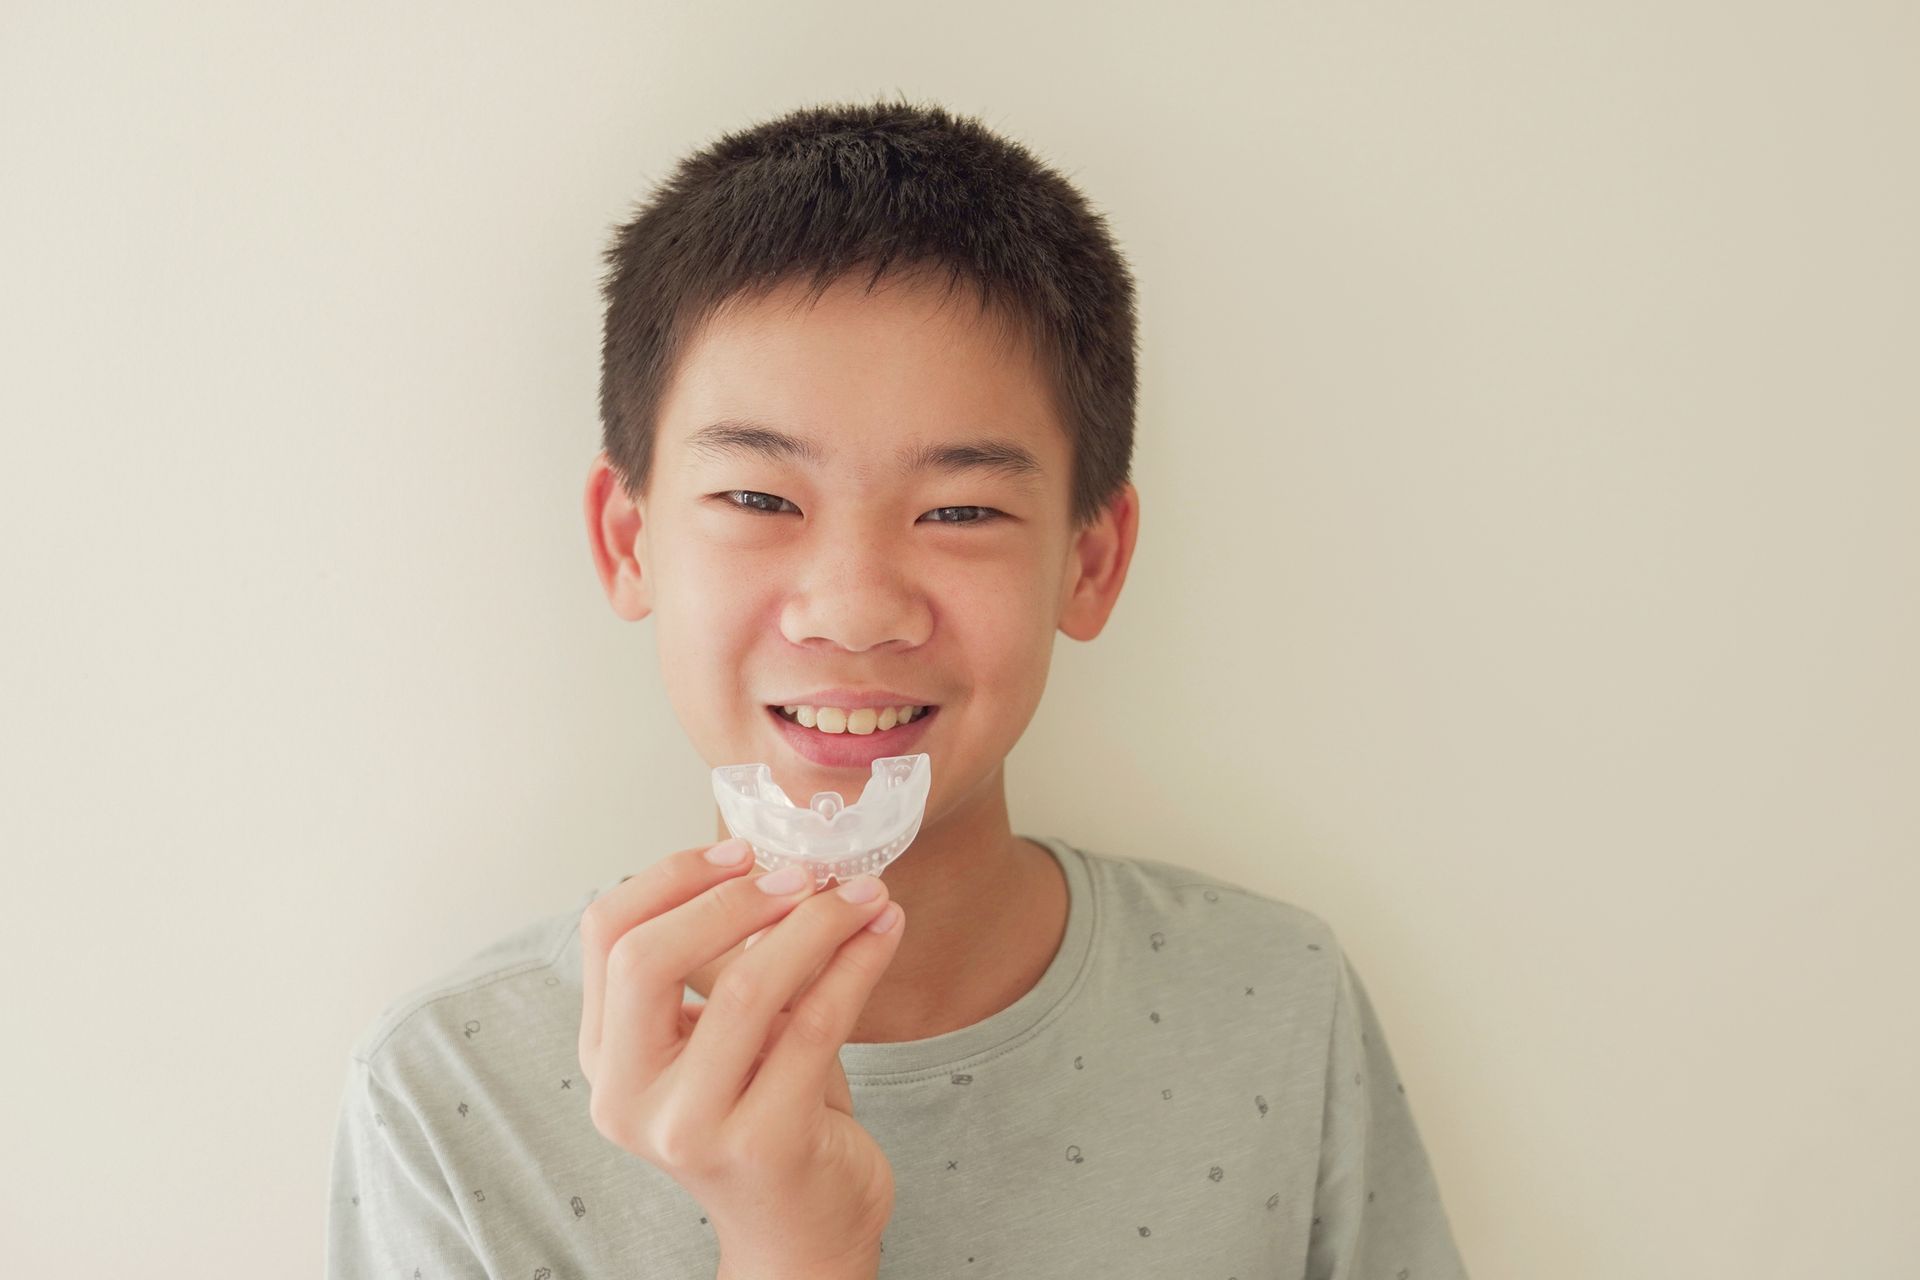 A young boy is holding a mouth guard in his hand and smiling.